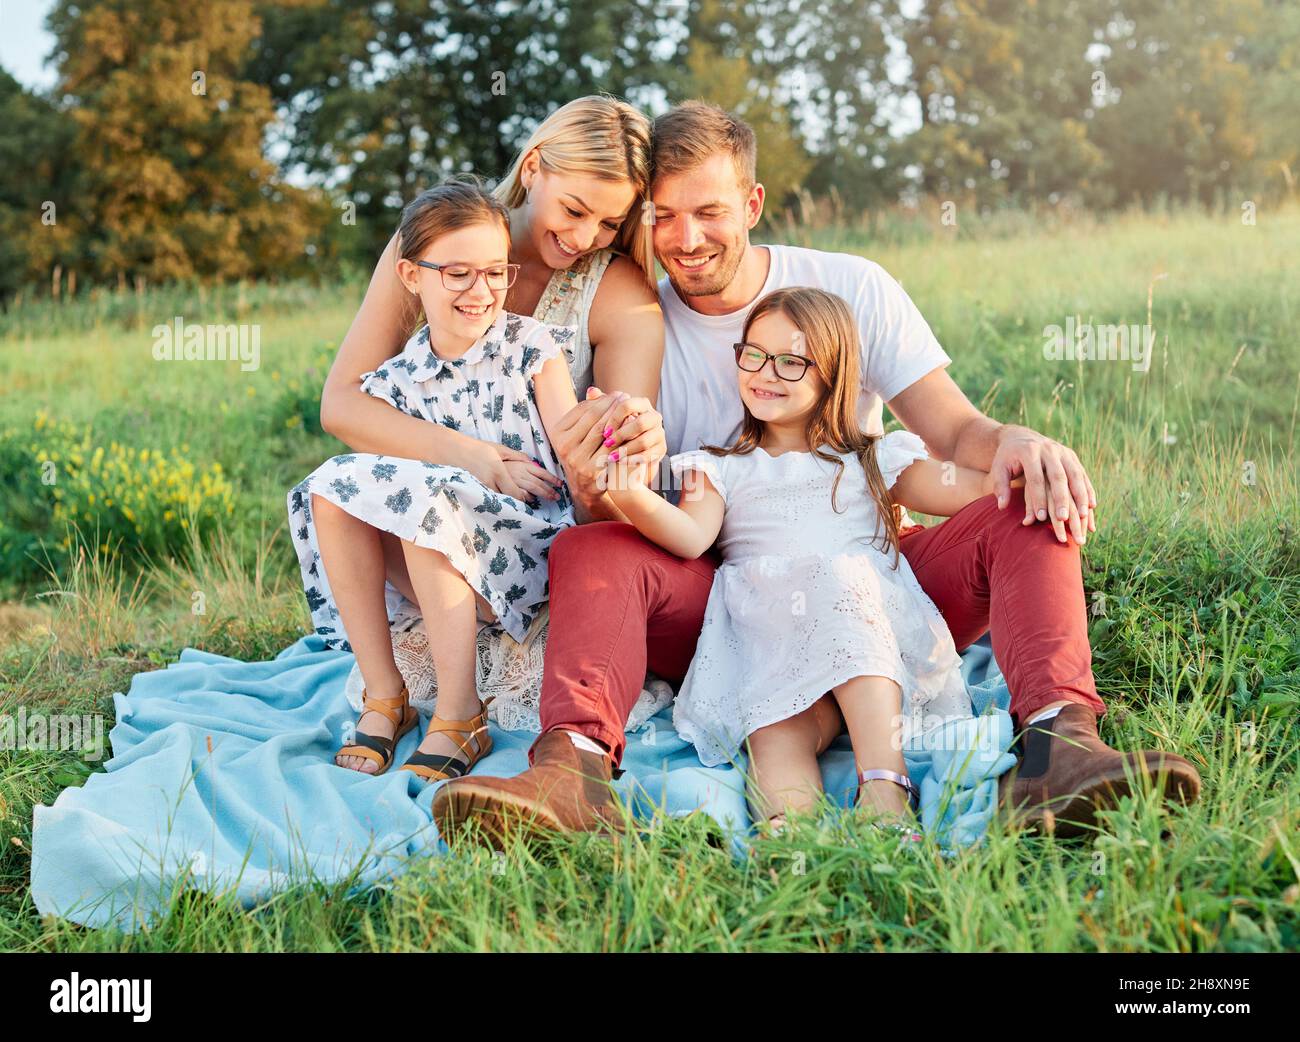 child family portrait outdoor mother woman father girl happy happiness lifestyle having fun bonding Stock Photo